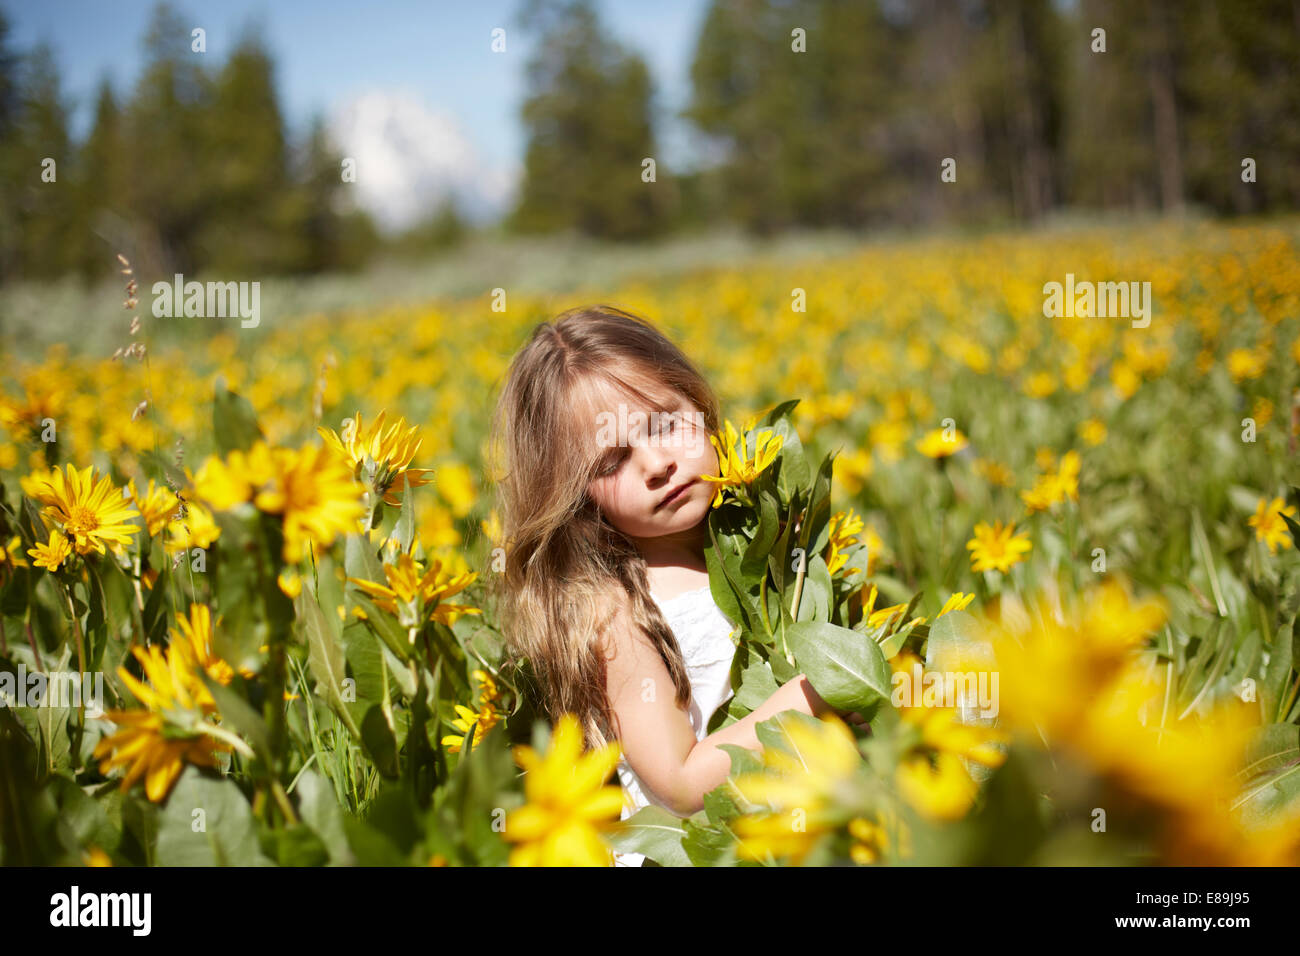 Girl in field of wildflowers Banque D'Images